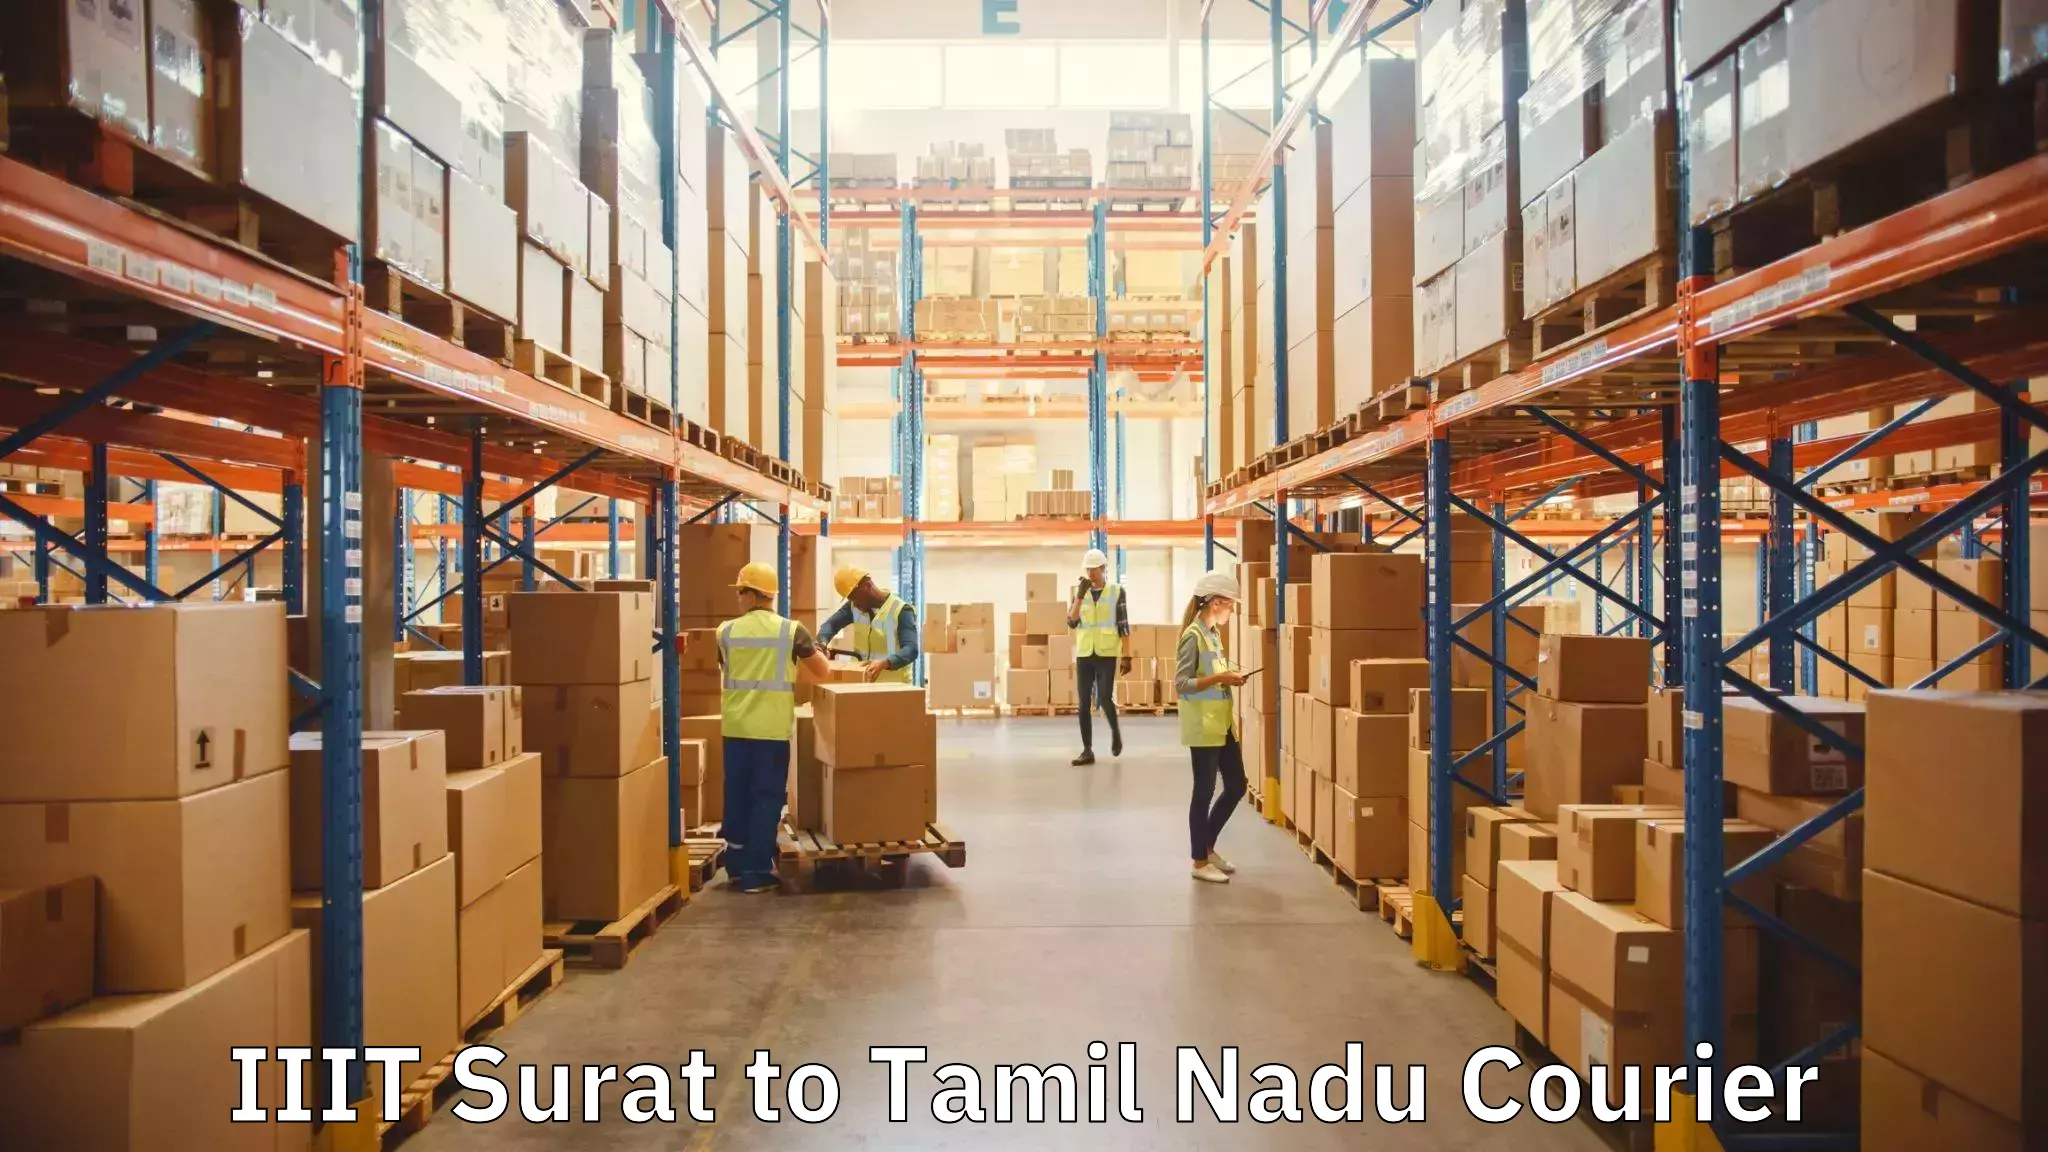 Long-distance moving services IIIT Surat to Shanmugha Arts Science Technology and Research Academy Thanjavur